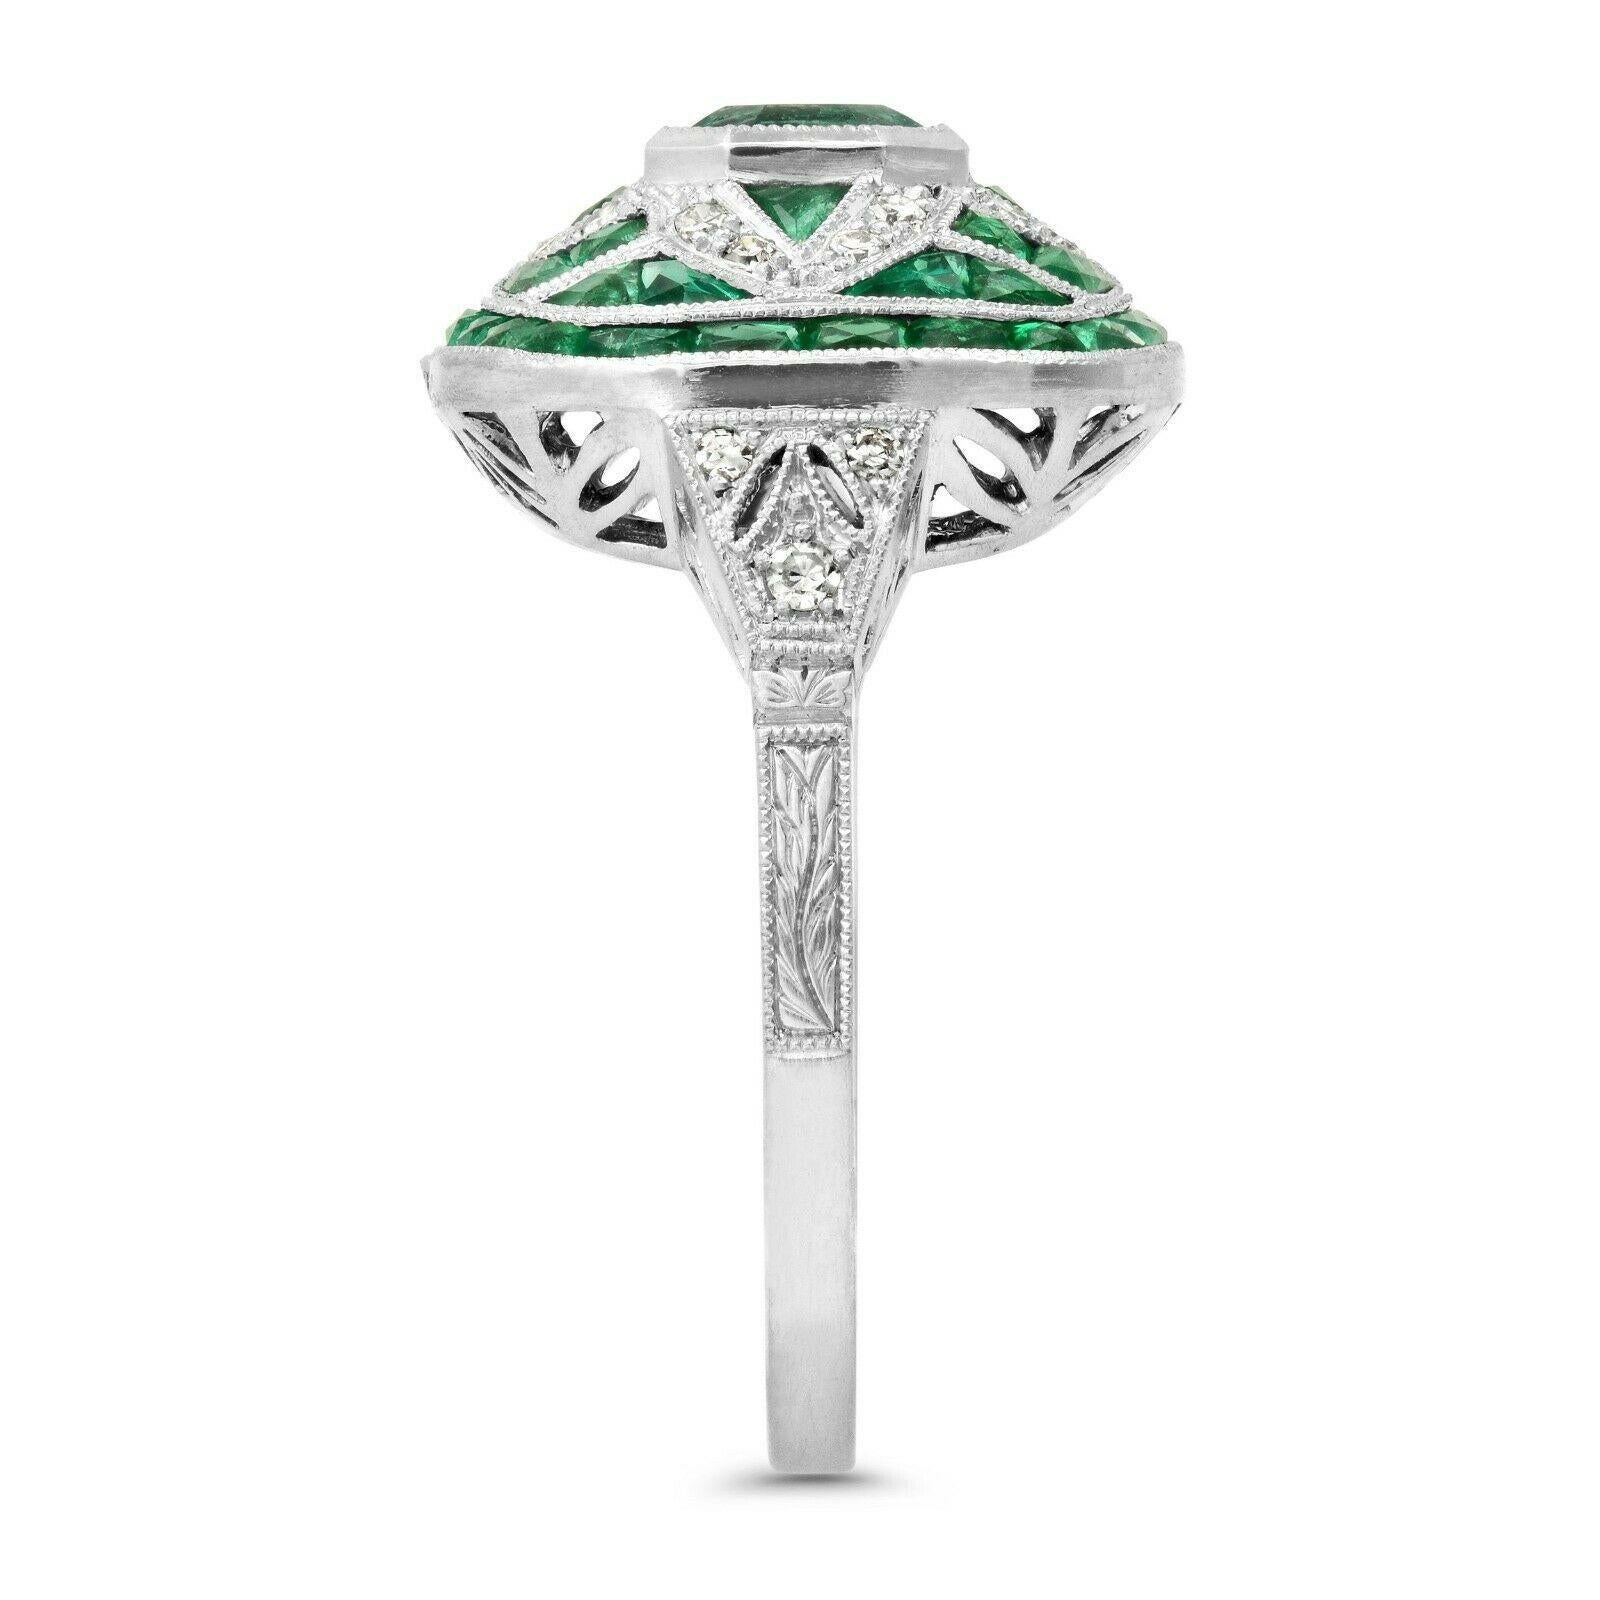 Emerald (1.64 total carat weight) and diamond (0.1 total carat weight) antique inspired cocktail ring in 900 platinum. The ring is designed and handmade locally in Los Angeles by Sage Designs L.A. using earth-mined and conflict free diamonds and